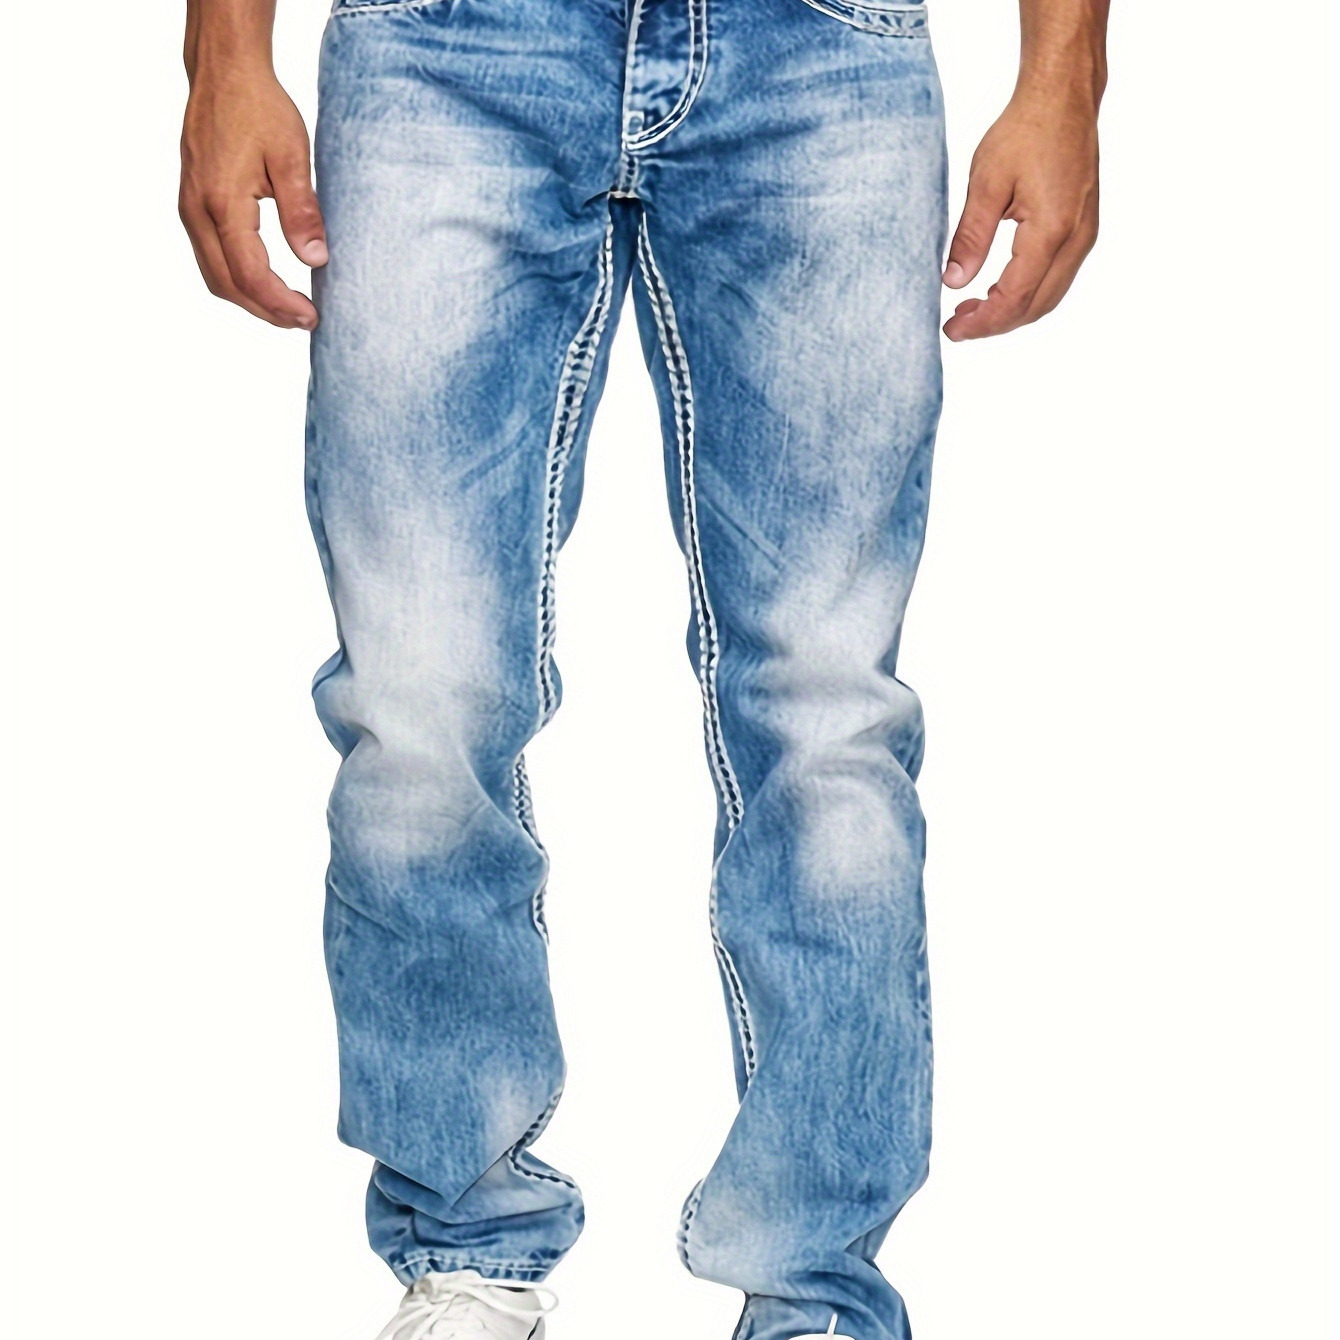 

Men's Casual Slim Fit Jeans, Street Style Retro Washed Stretch Jeans For Men, All Seasons